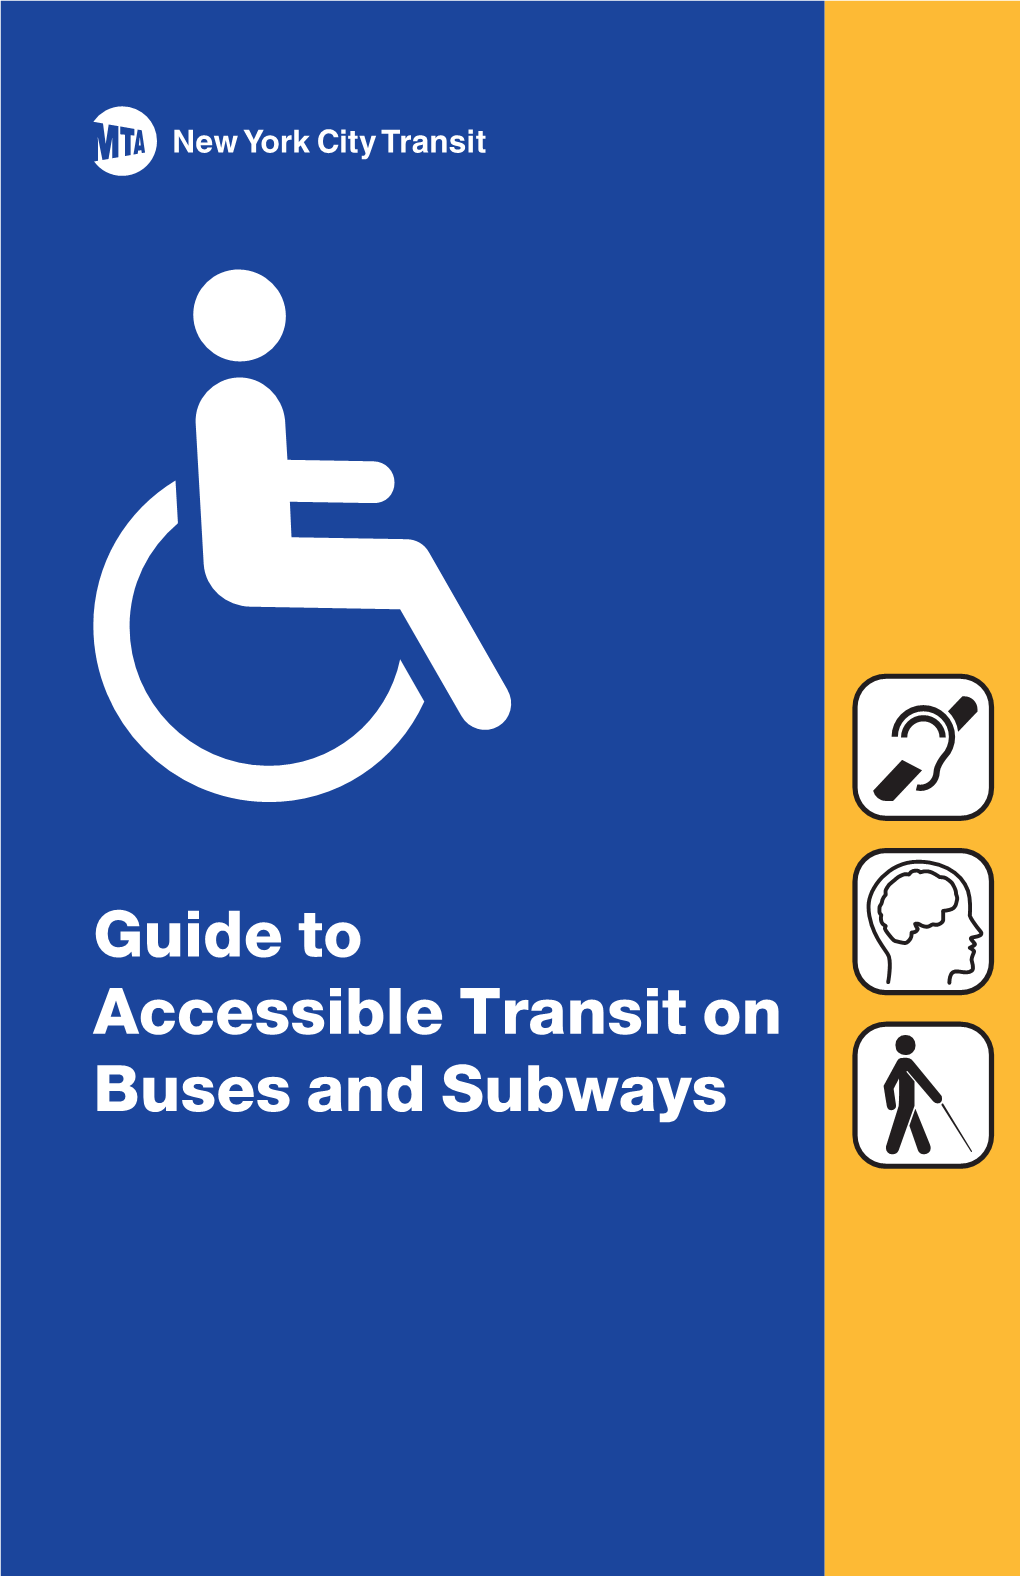 Guide to Accessible Transit on Buses and Subways Table of Contents